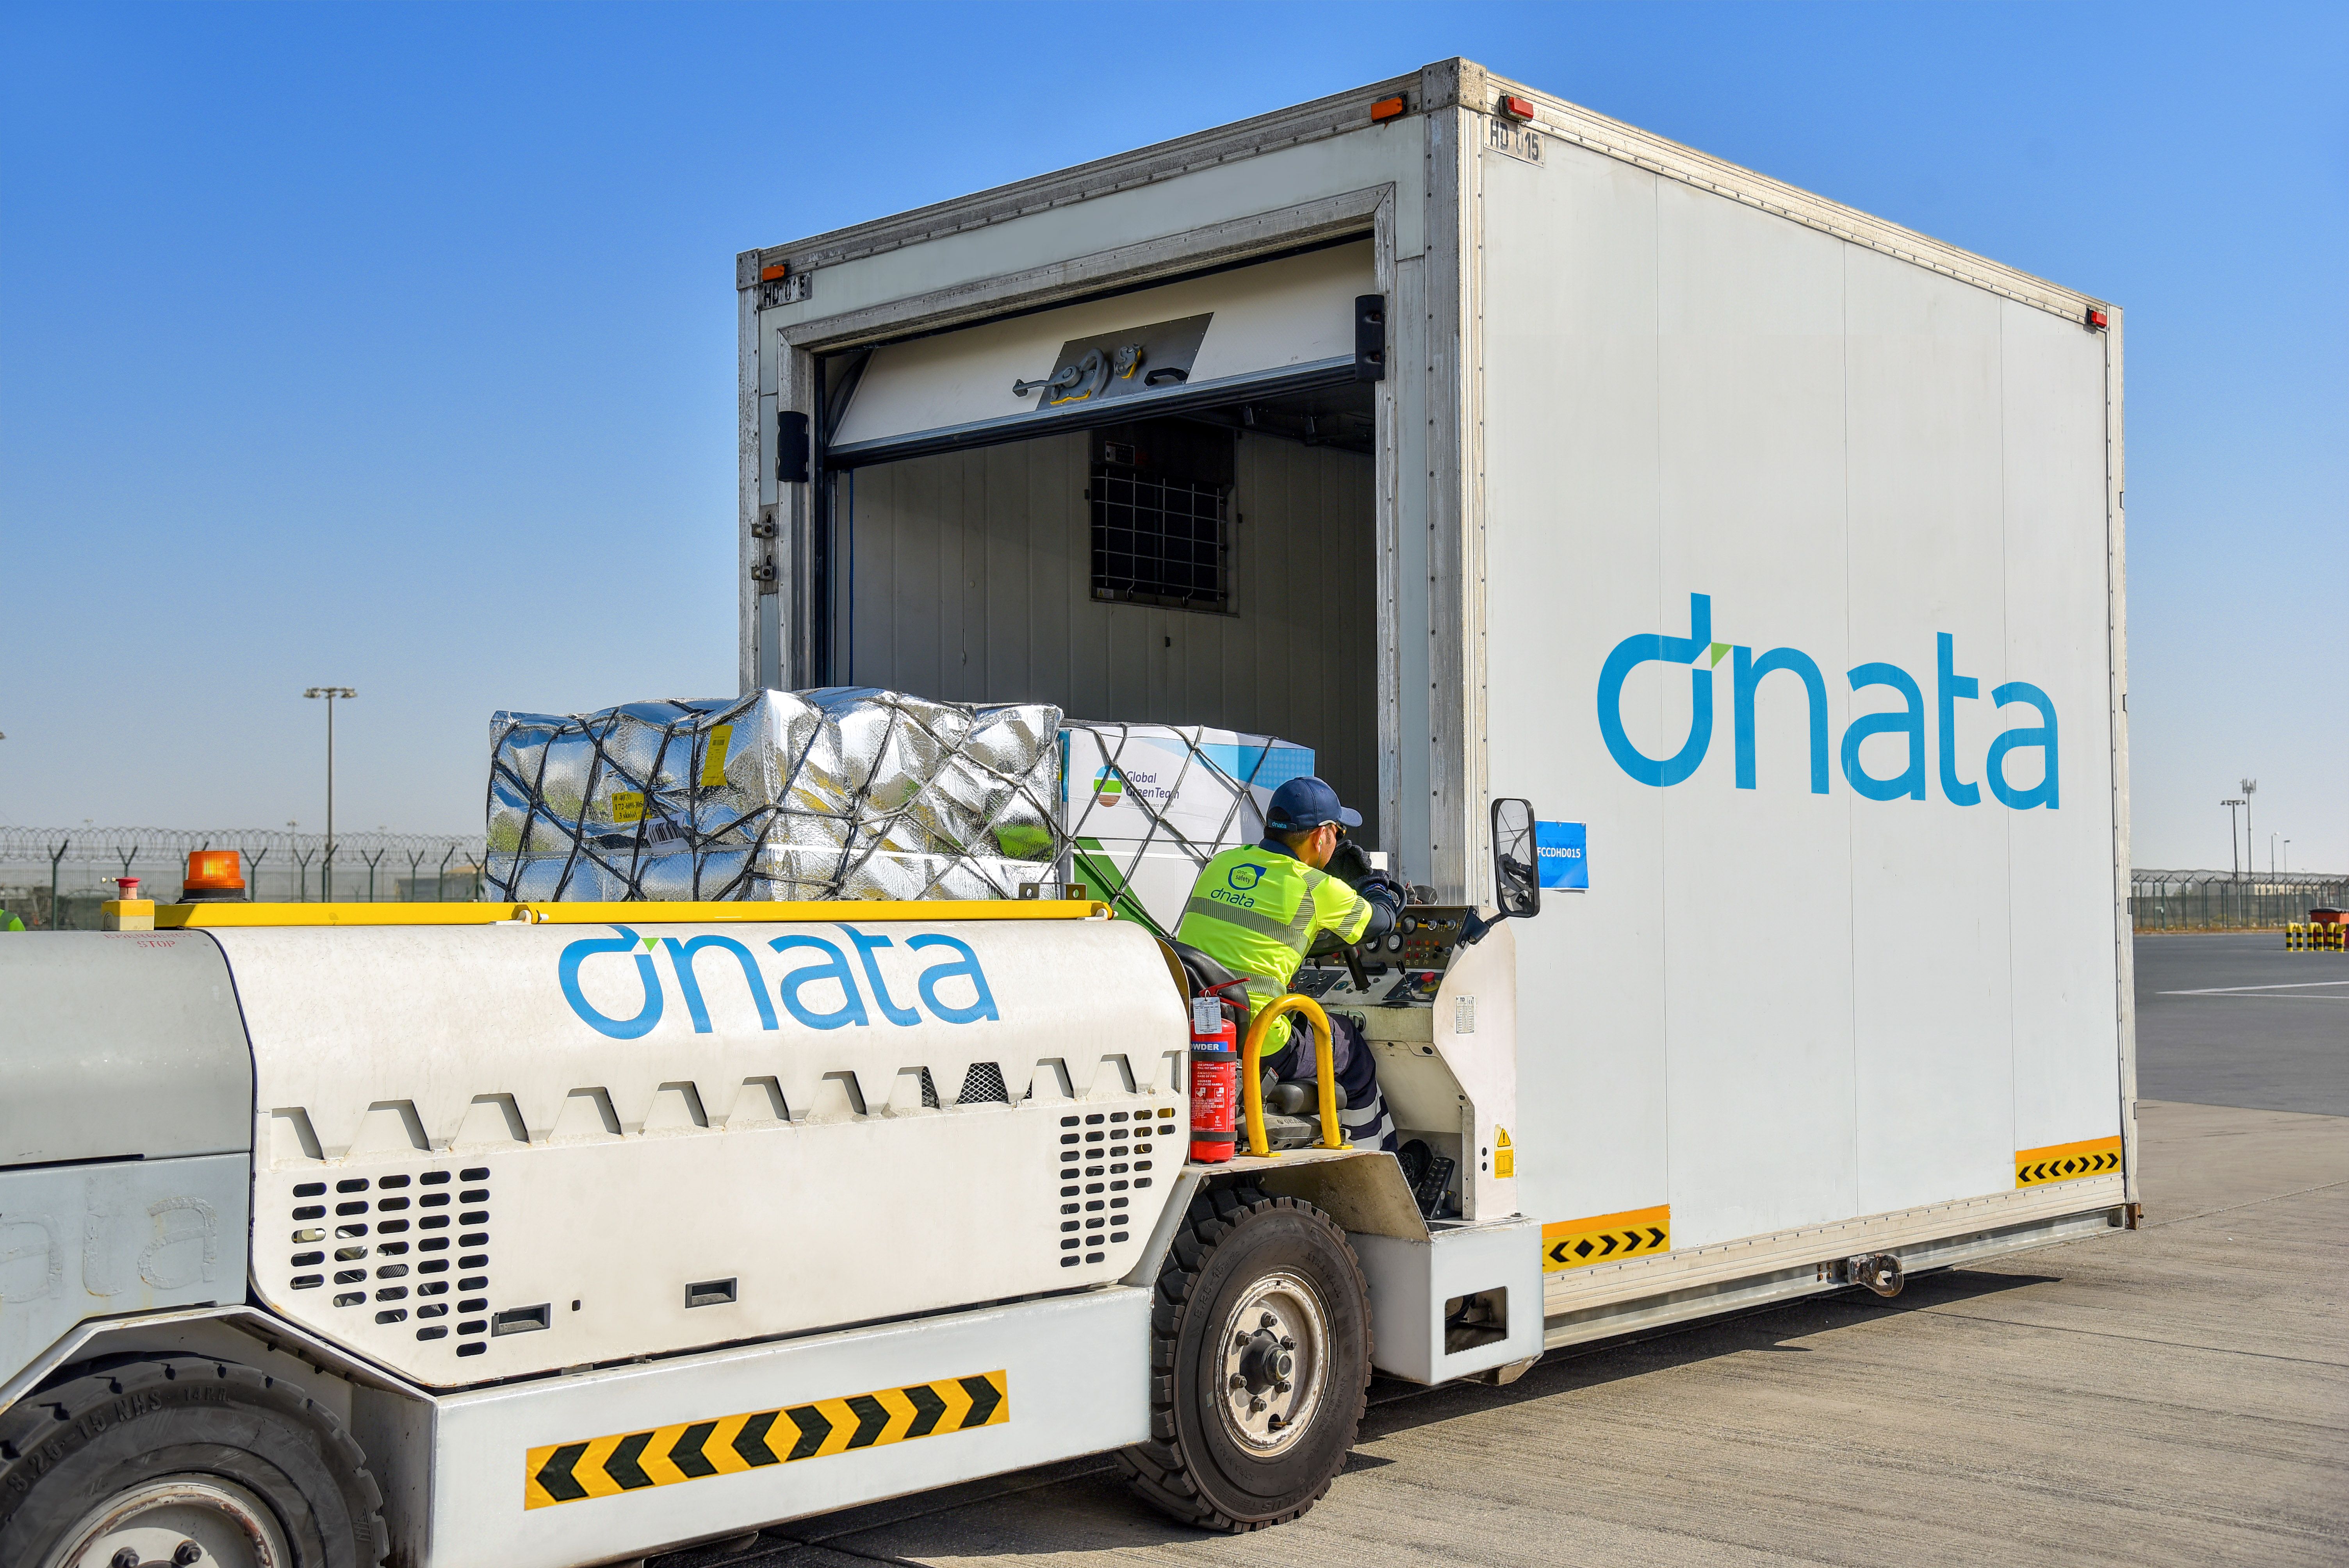 Adnata Ground Handling Vehicle with a large amount of cargo.